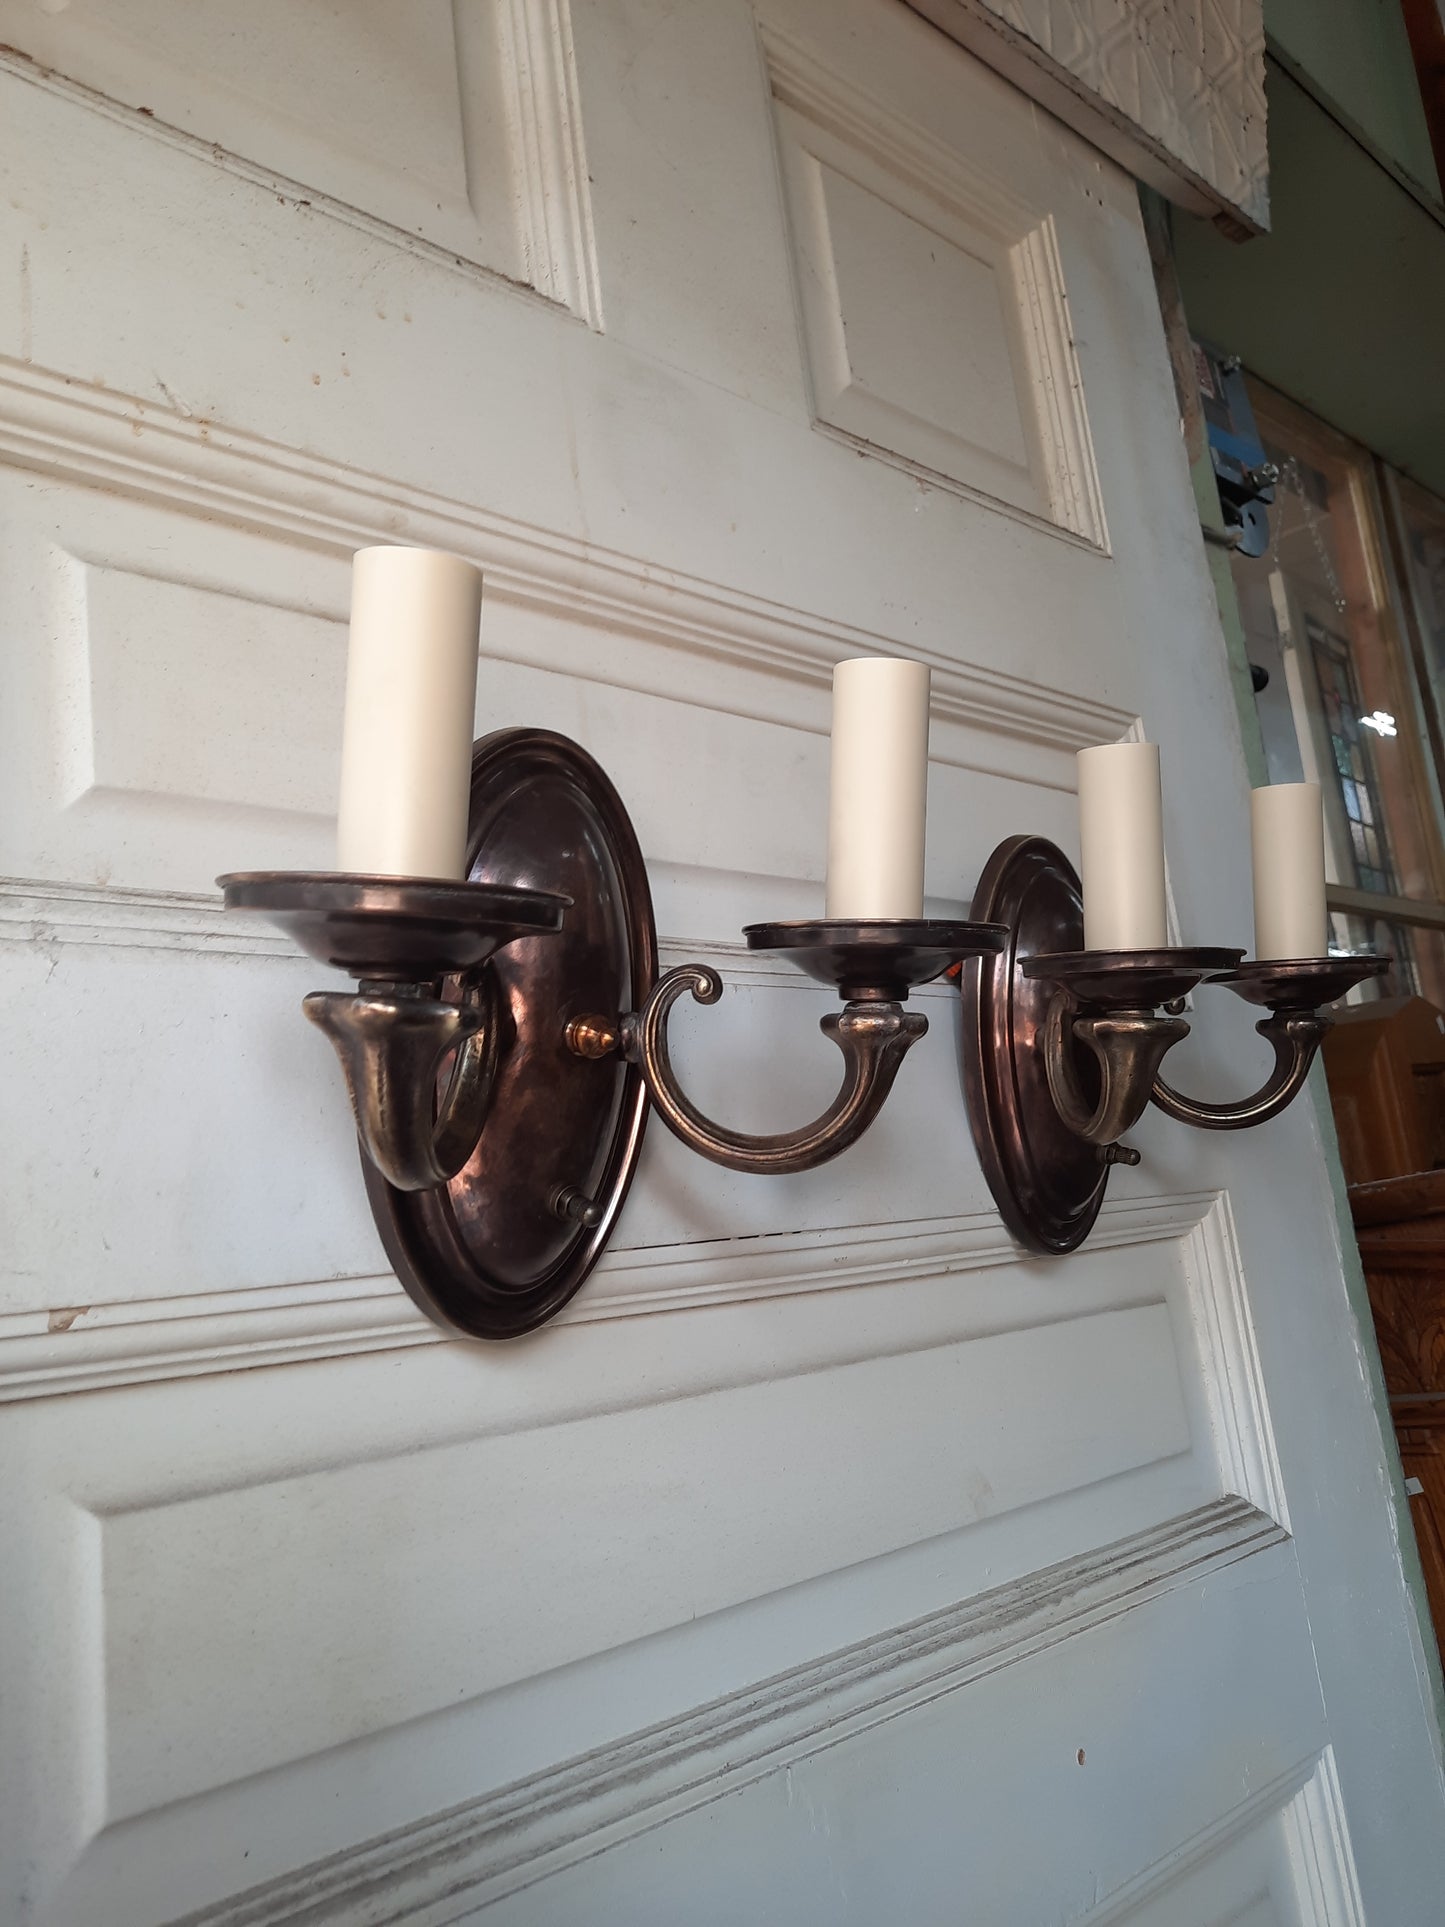 Pair of Bronze Two Arm Wall Sconces, Antique Pair of Bronze Sconce Lights with Candle Sockets